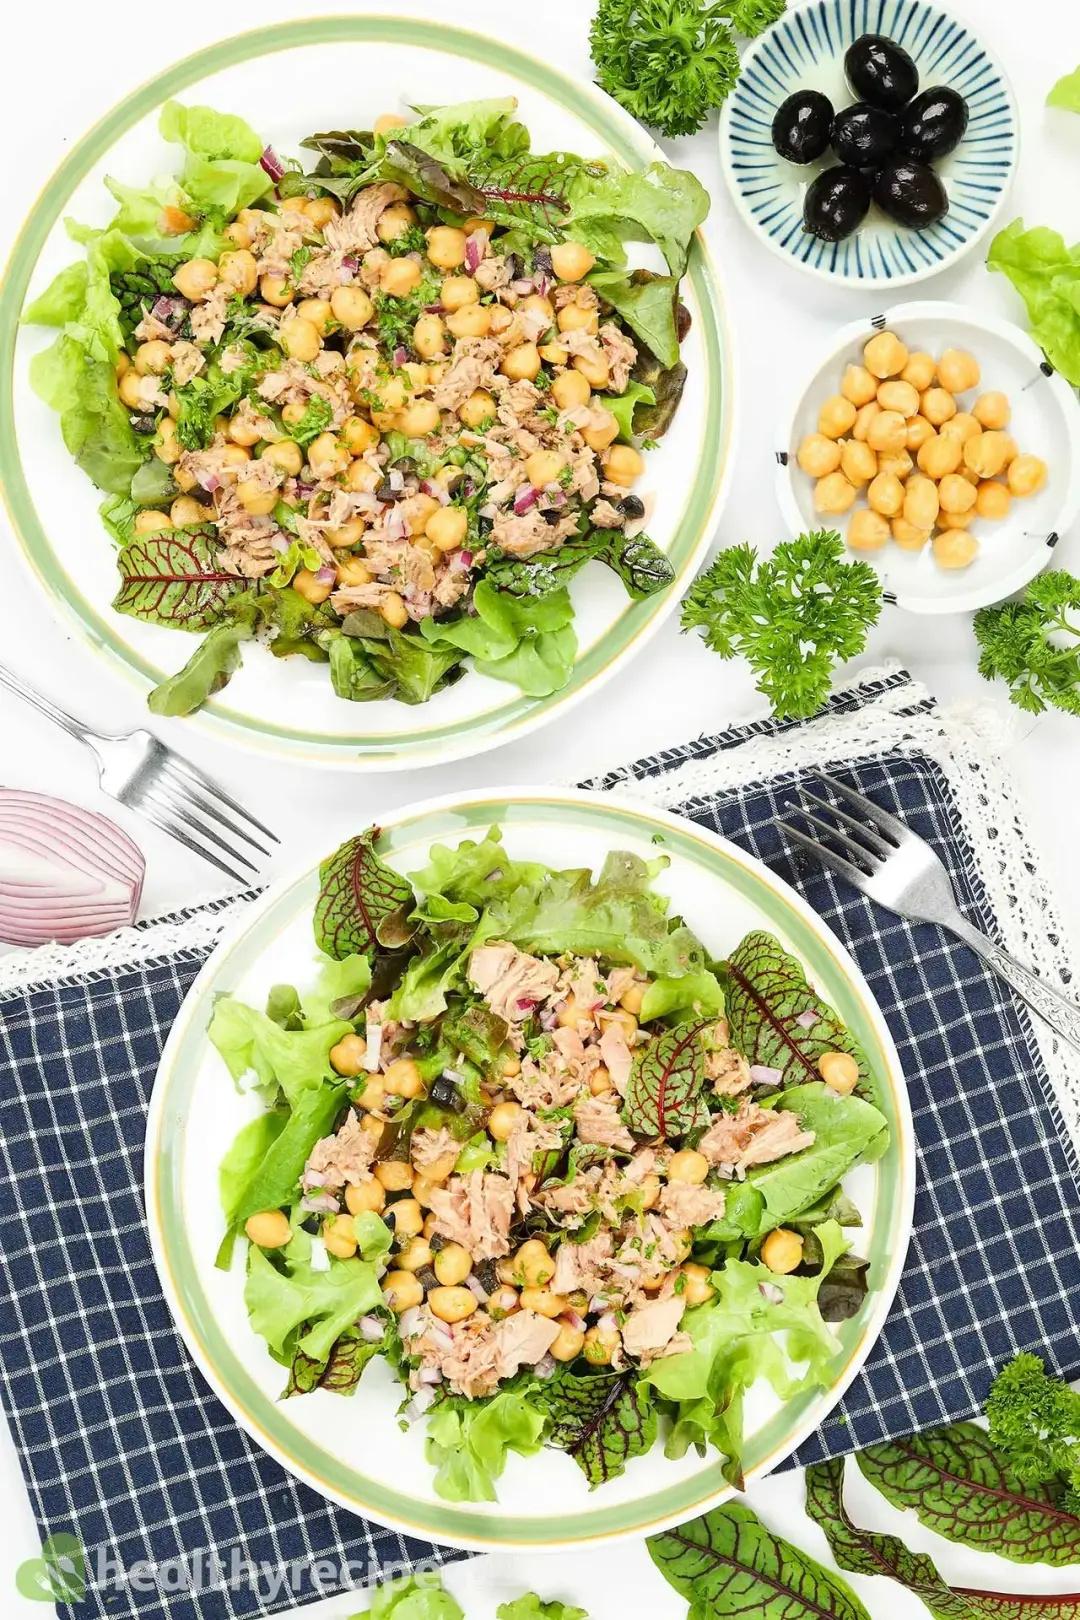 What to Serve Chickpea Tuna Salad With